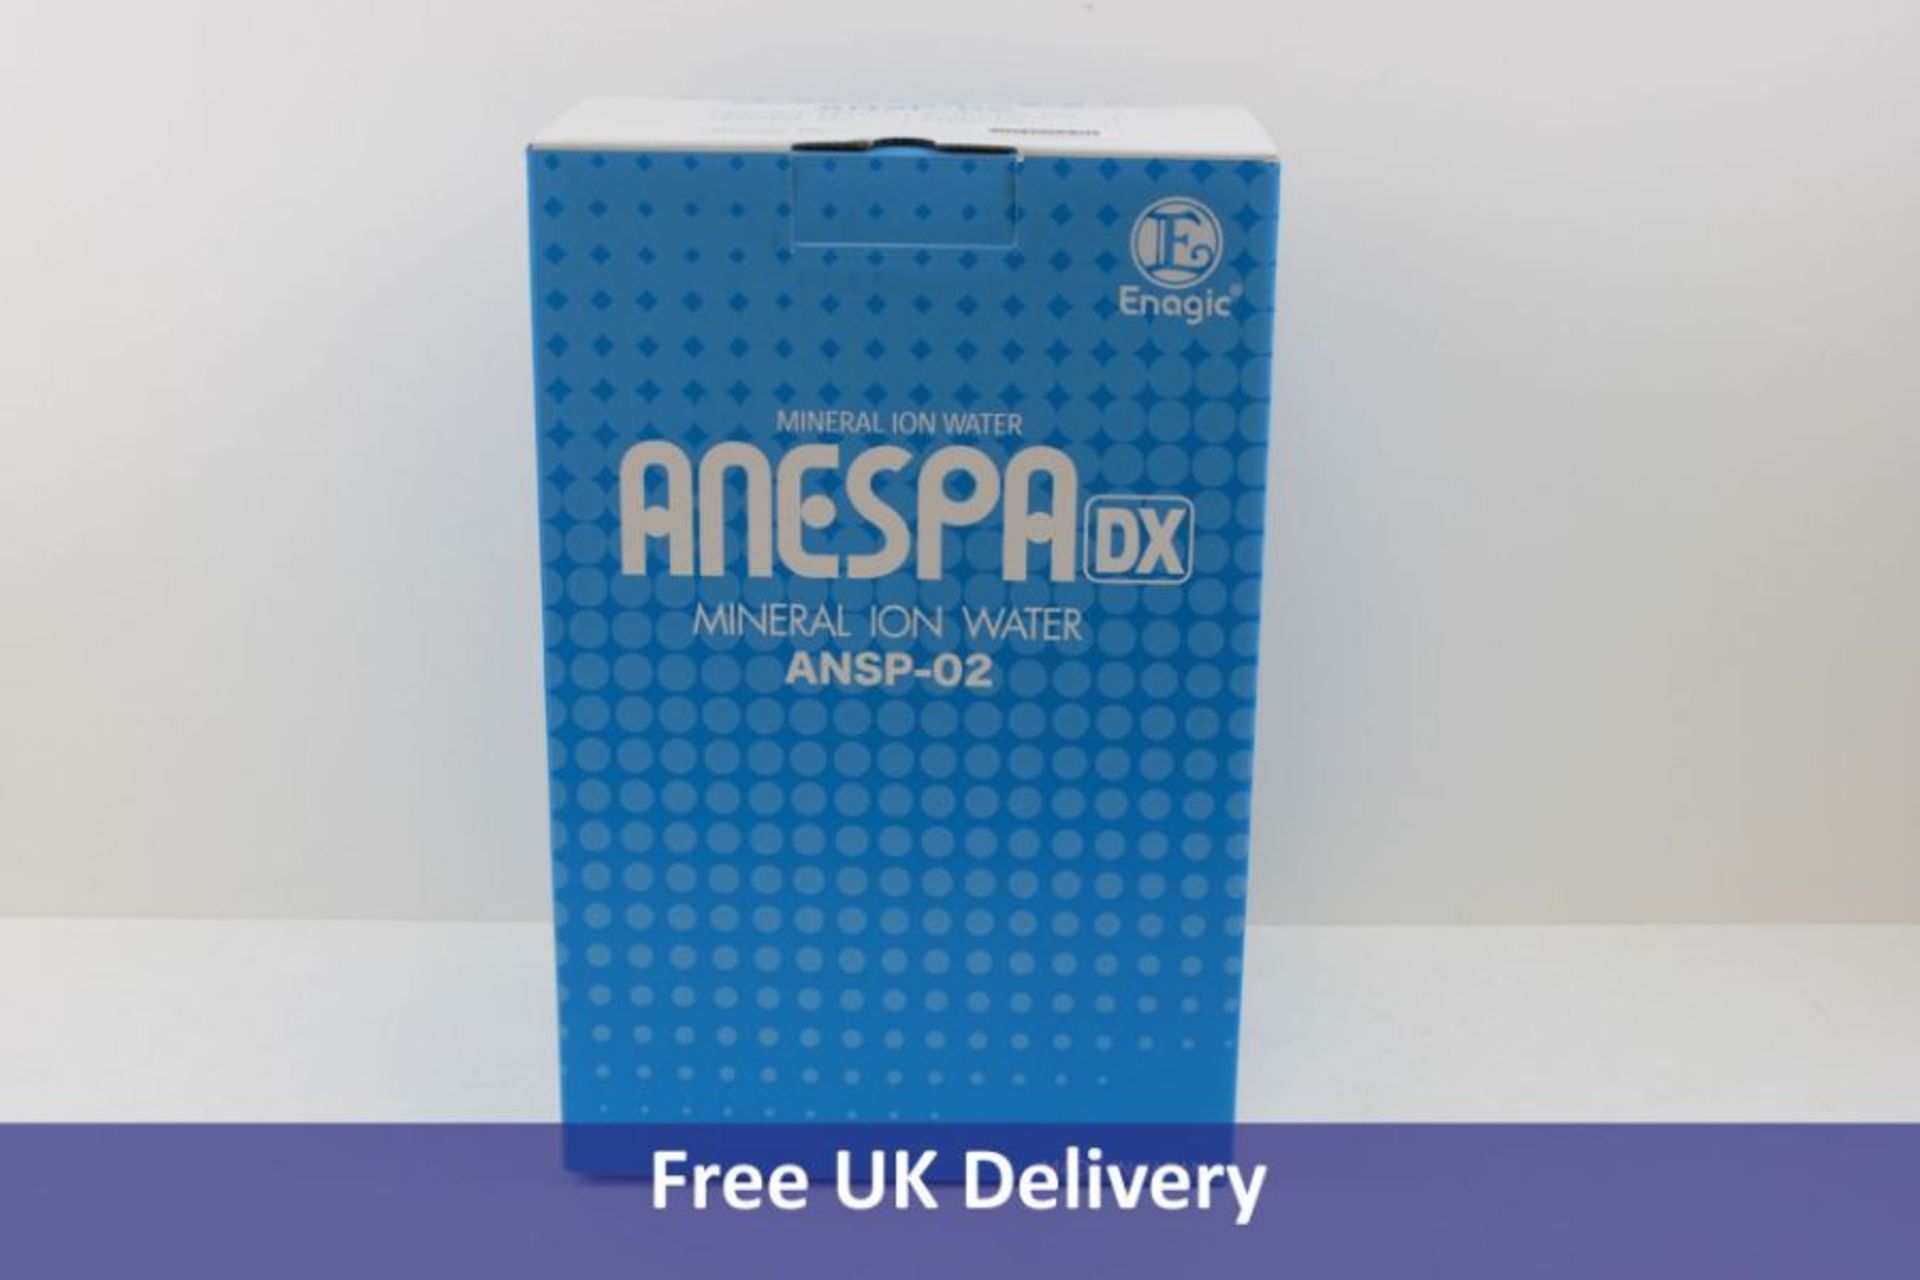 ENAGIC ANESPA DX Mineral Ion Water ANSP-02 Home Shower, Bath & Spa Water System